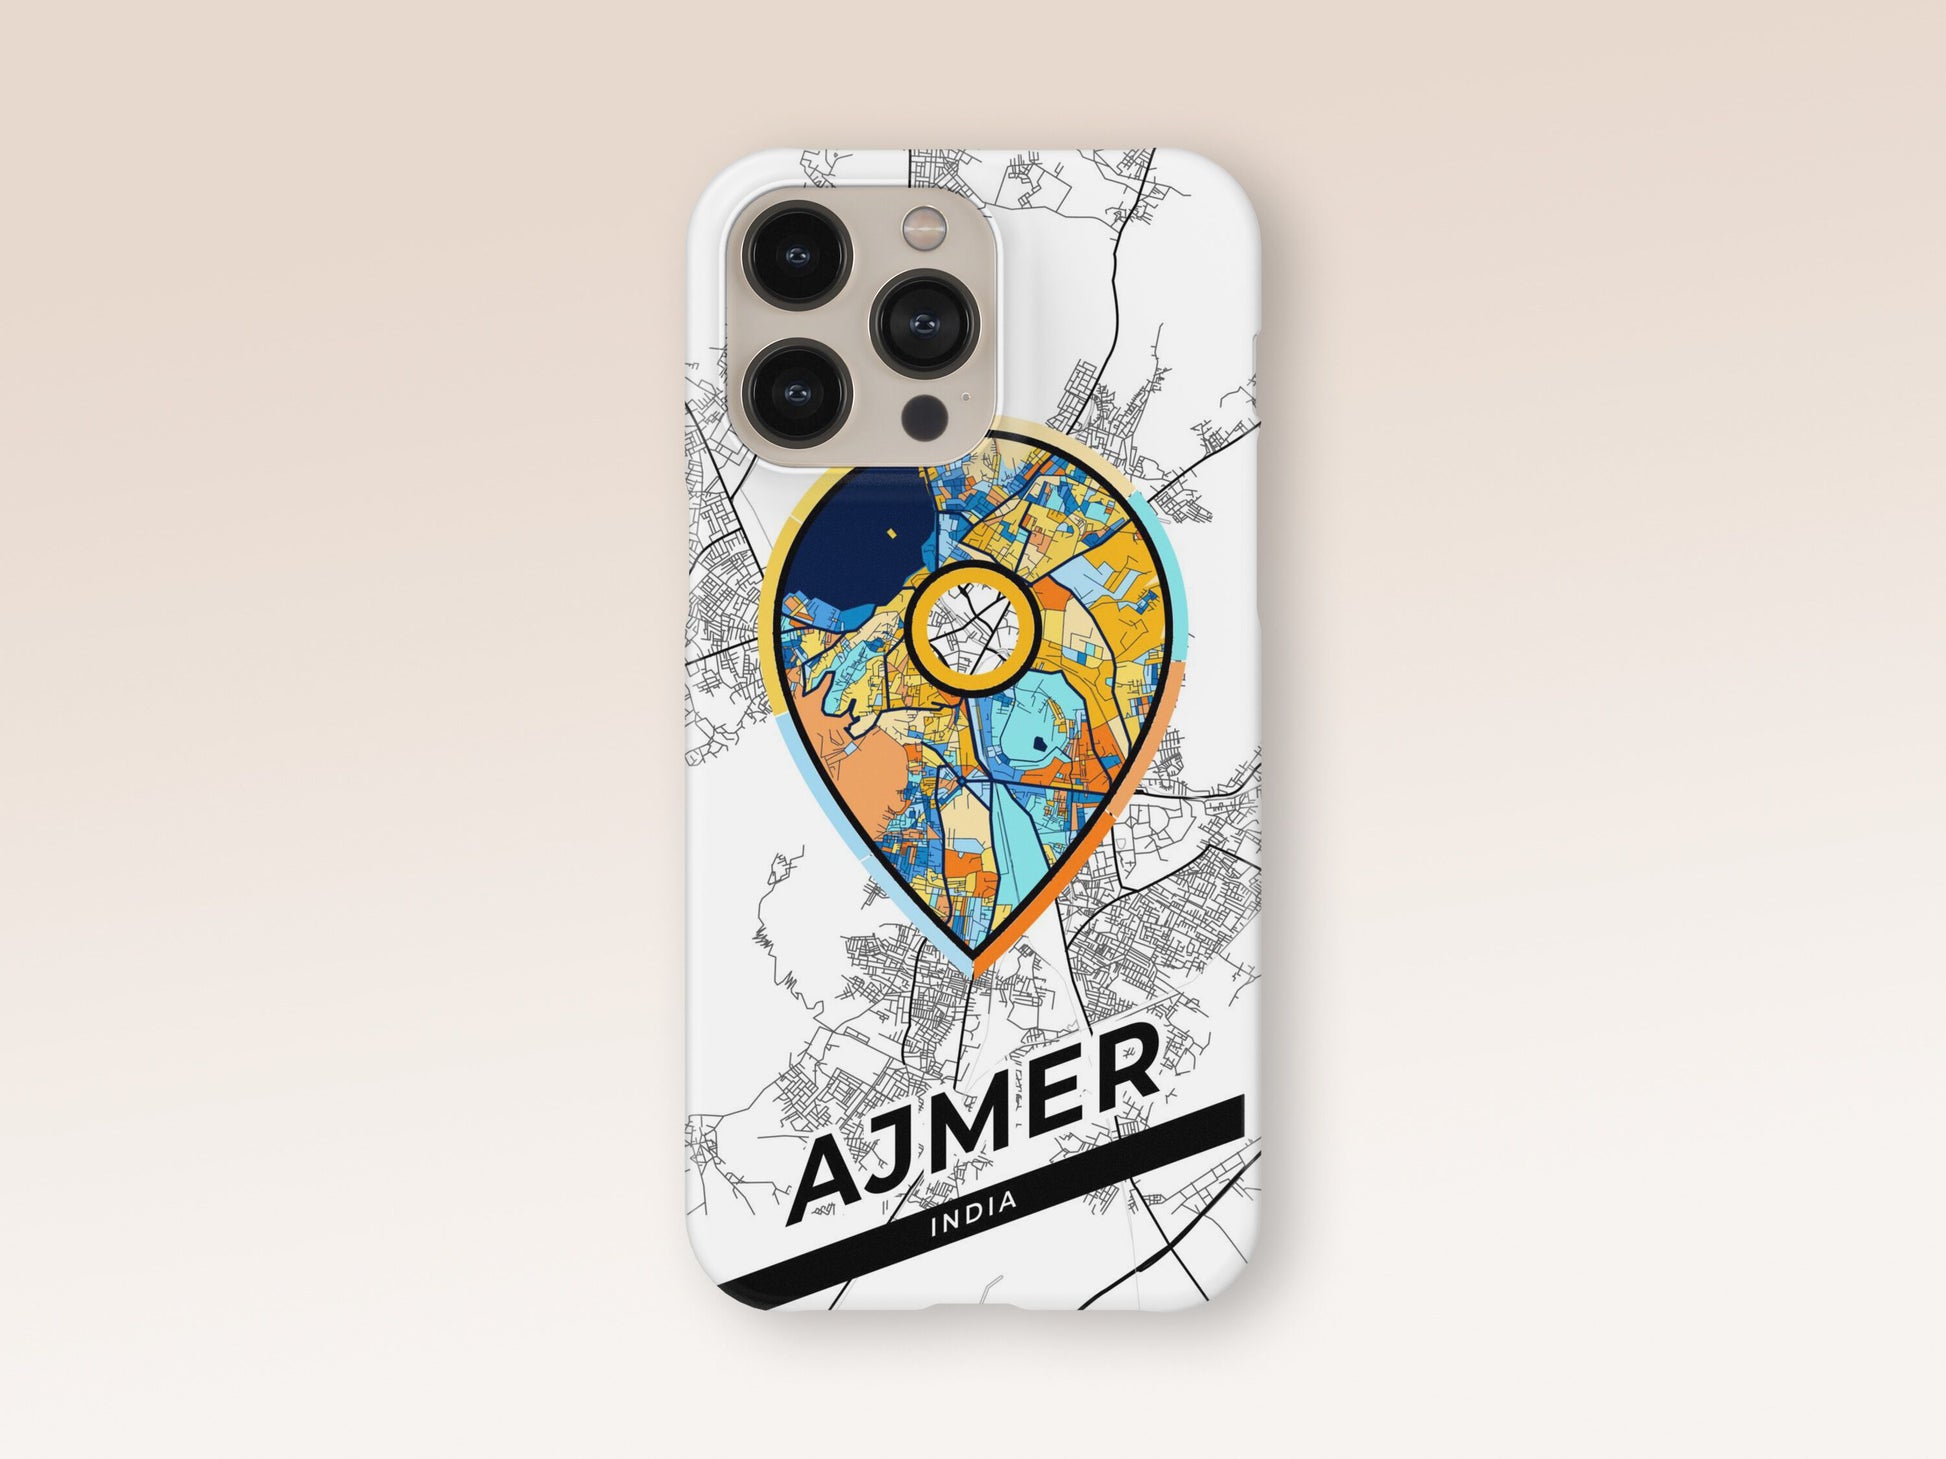 Ajmer India slim phone case with colorful icon. Birthday, wedding or housewarming gift. Couple match cases. 1